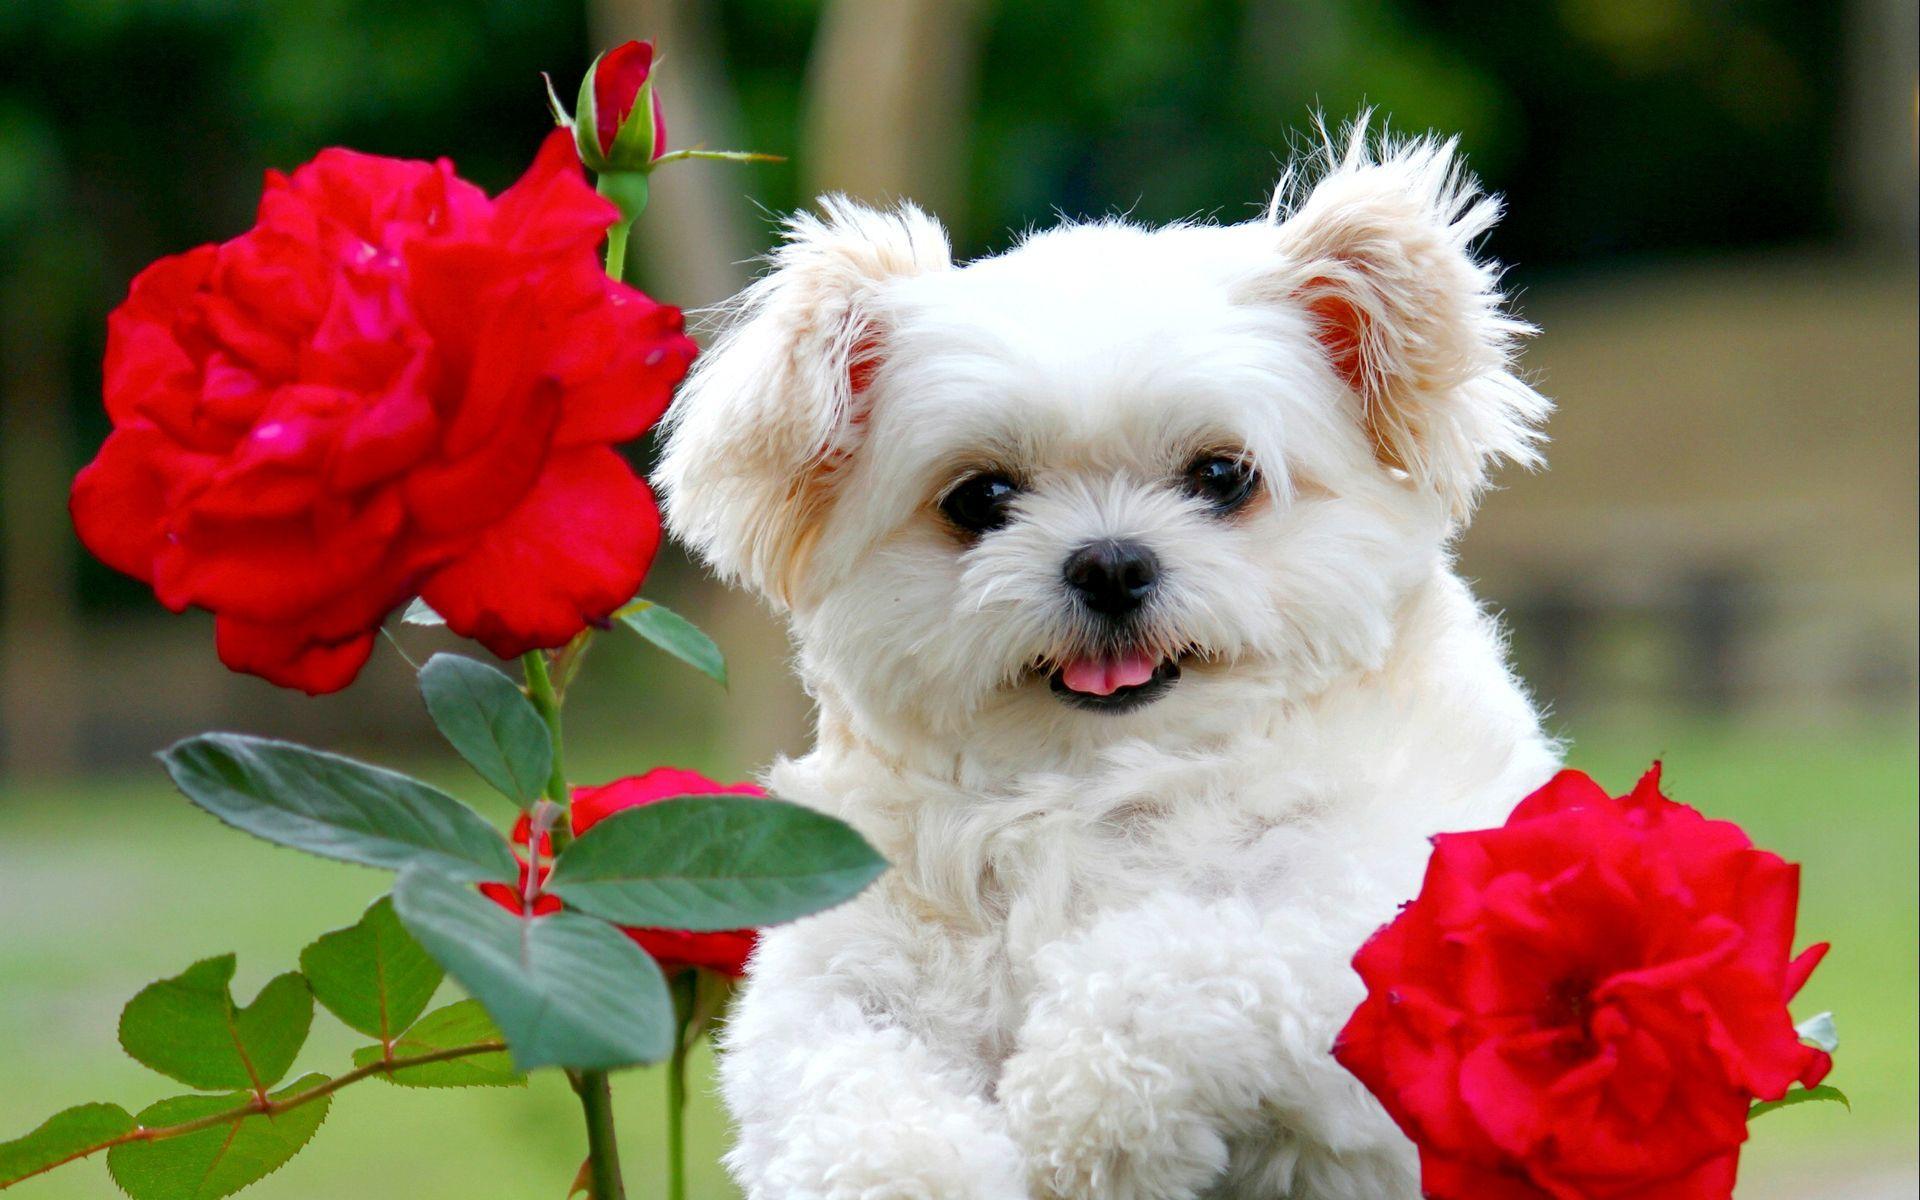 Cute Little Puppies Wallpapers - Top Free Cute Little Puppies